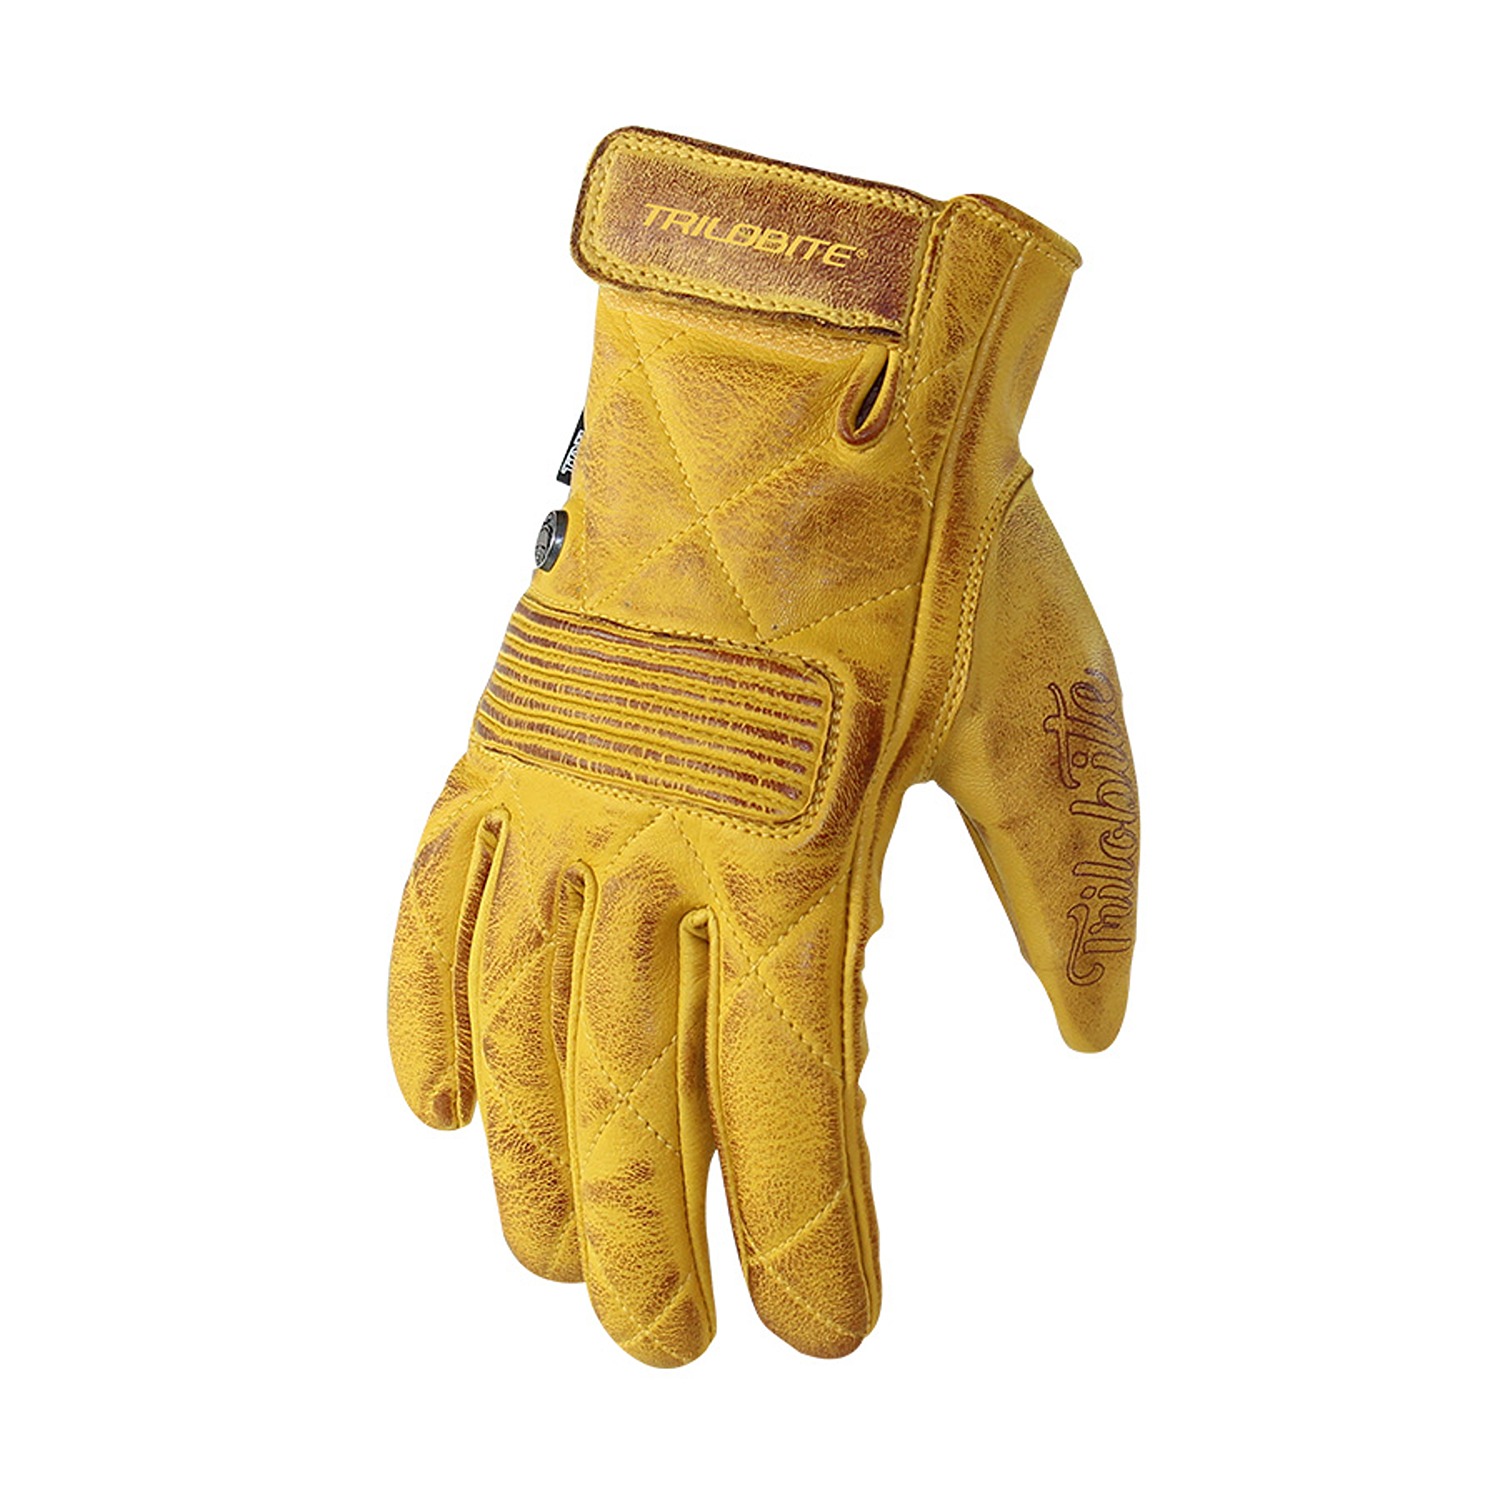 Image of Trilobite Faster Gloves Yellow Size 2XL ID 8595657839636